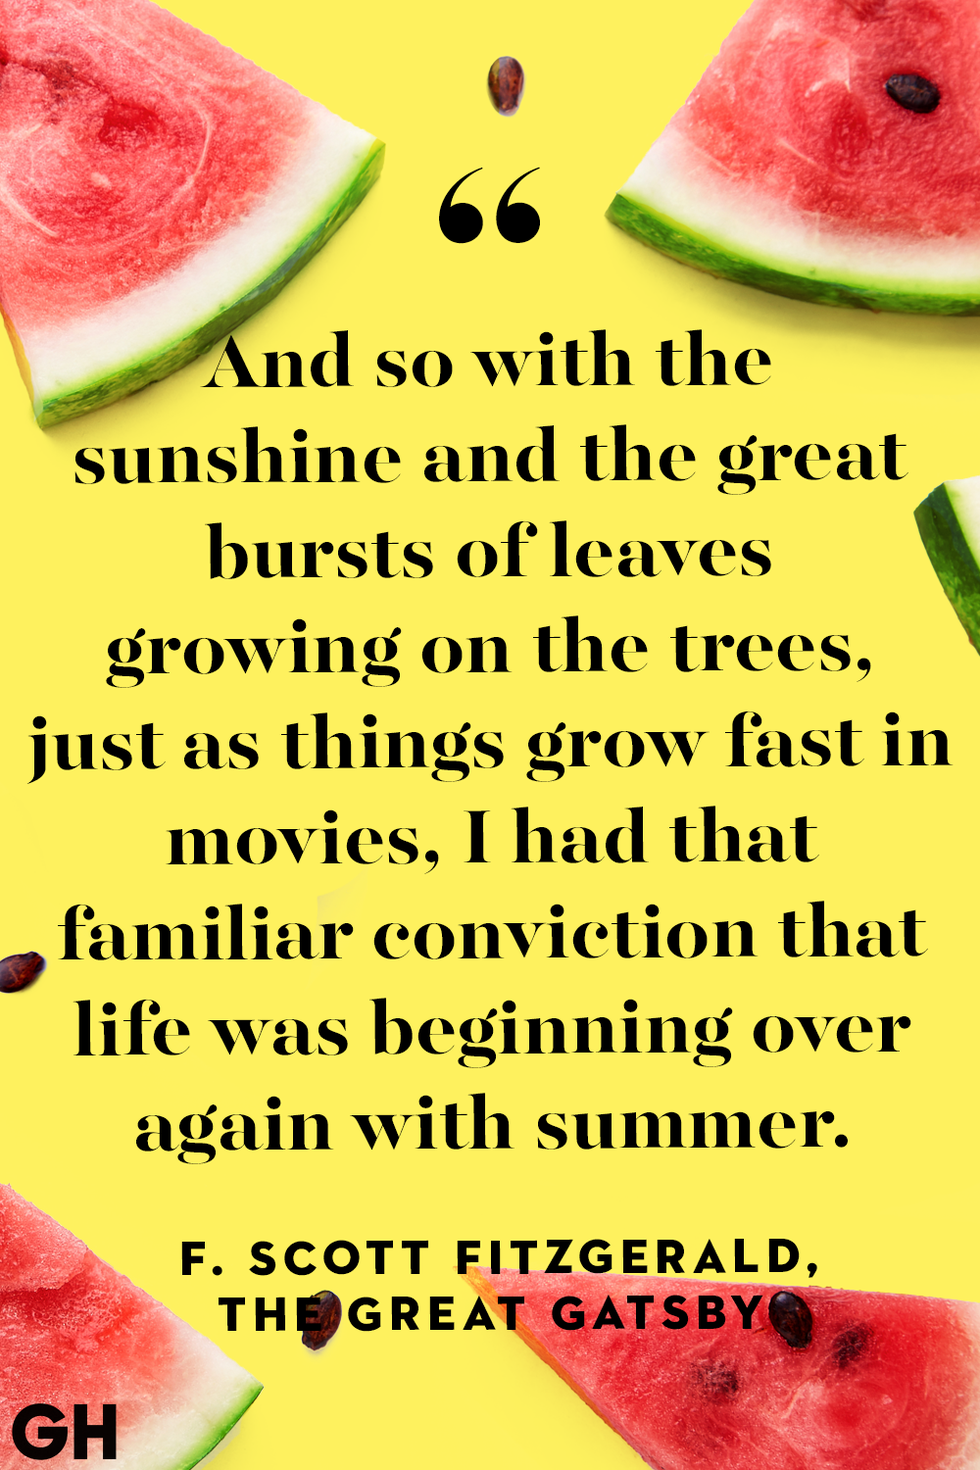 quote about summer by f scott fitzgerald, the great gatsby